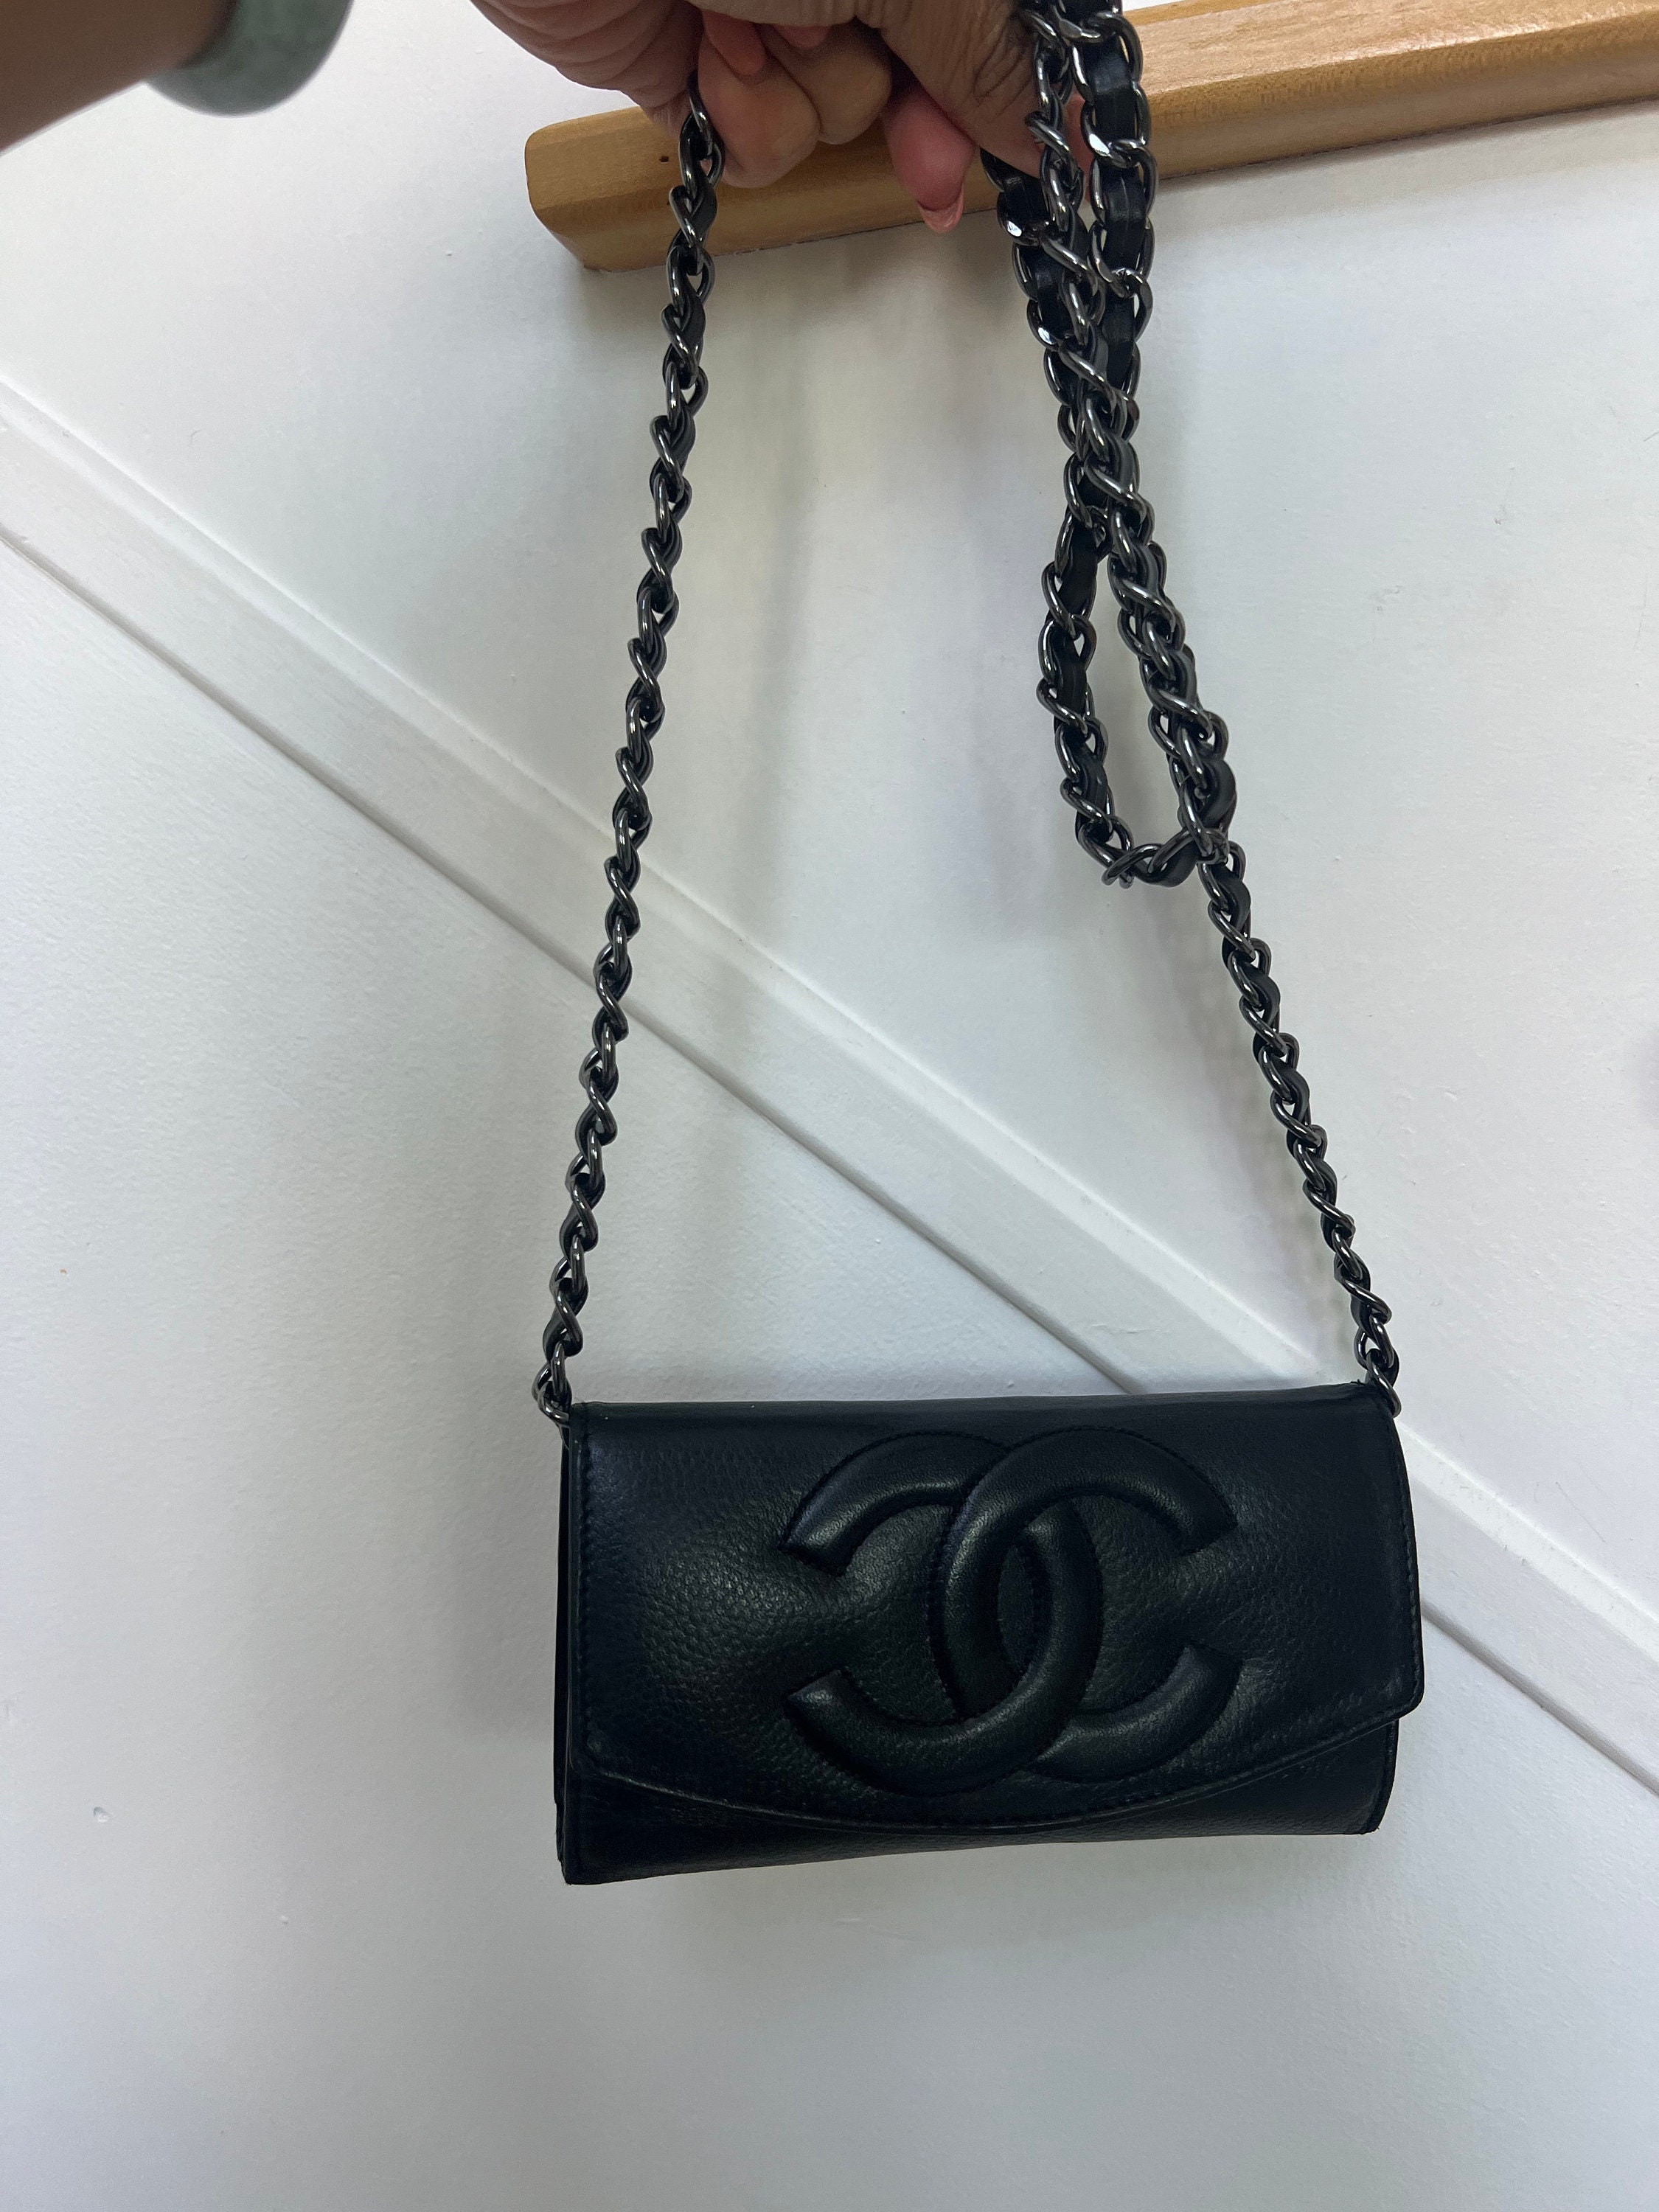 Chanel Black Quilted Caviar Classic Long Zipped Wallet